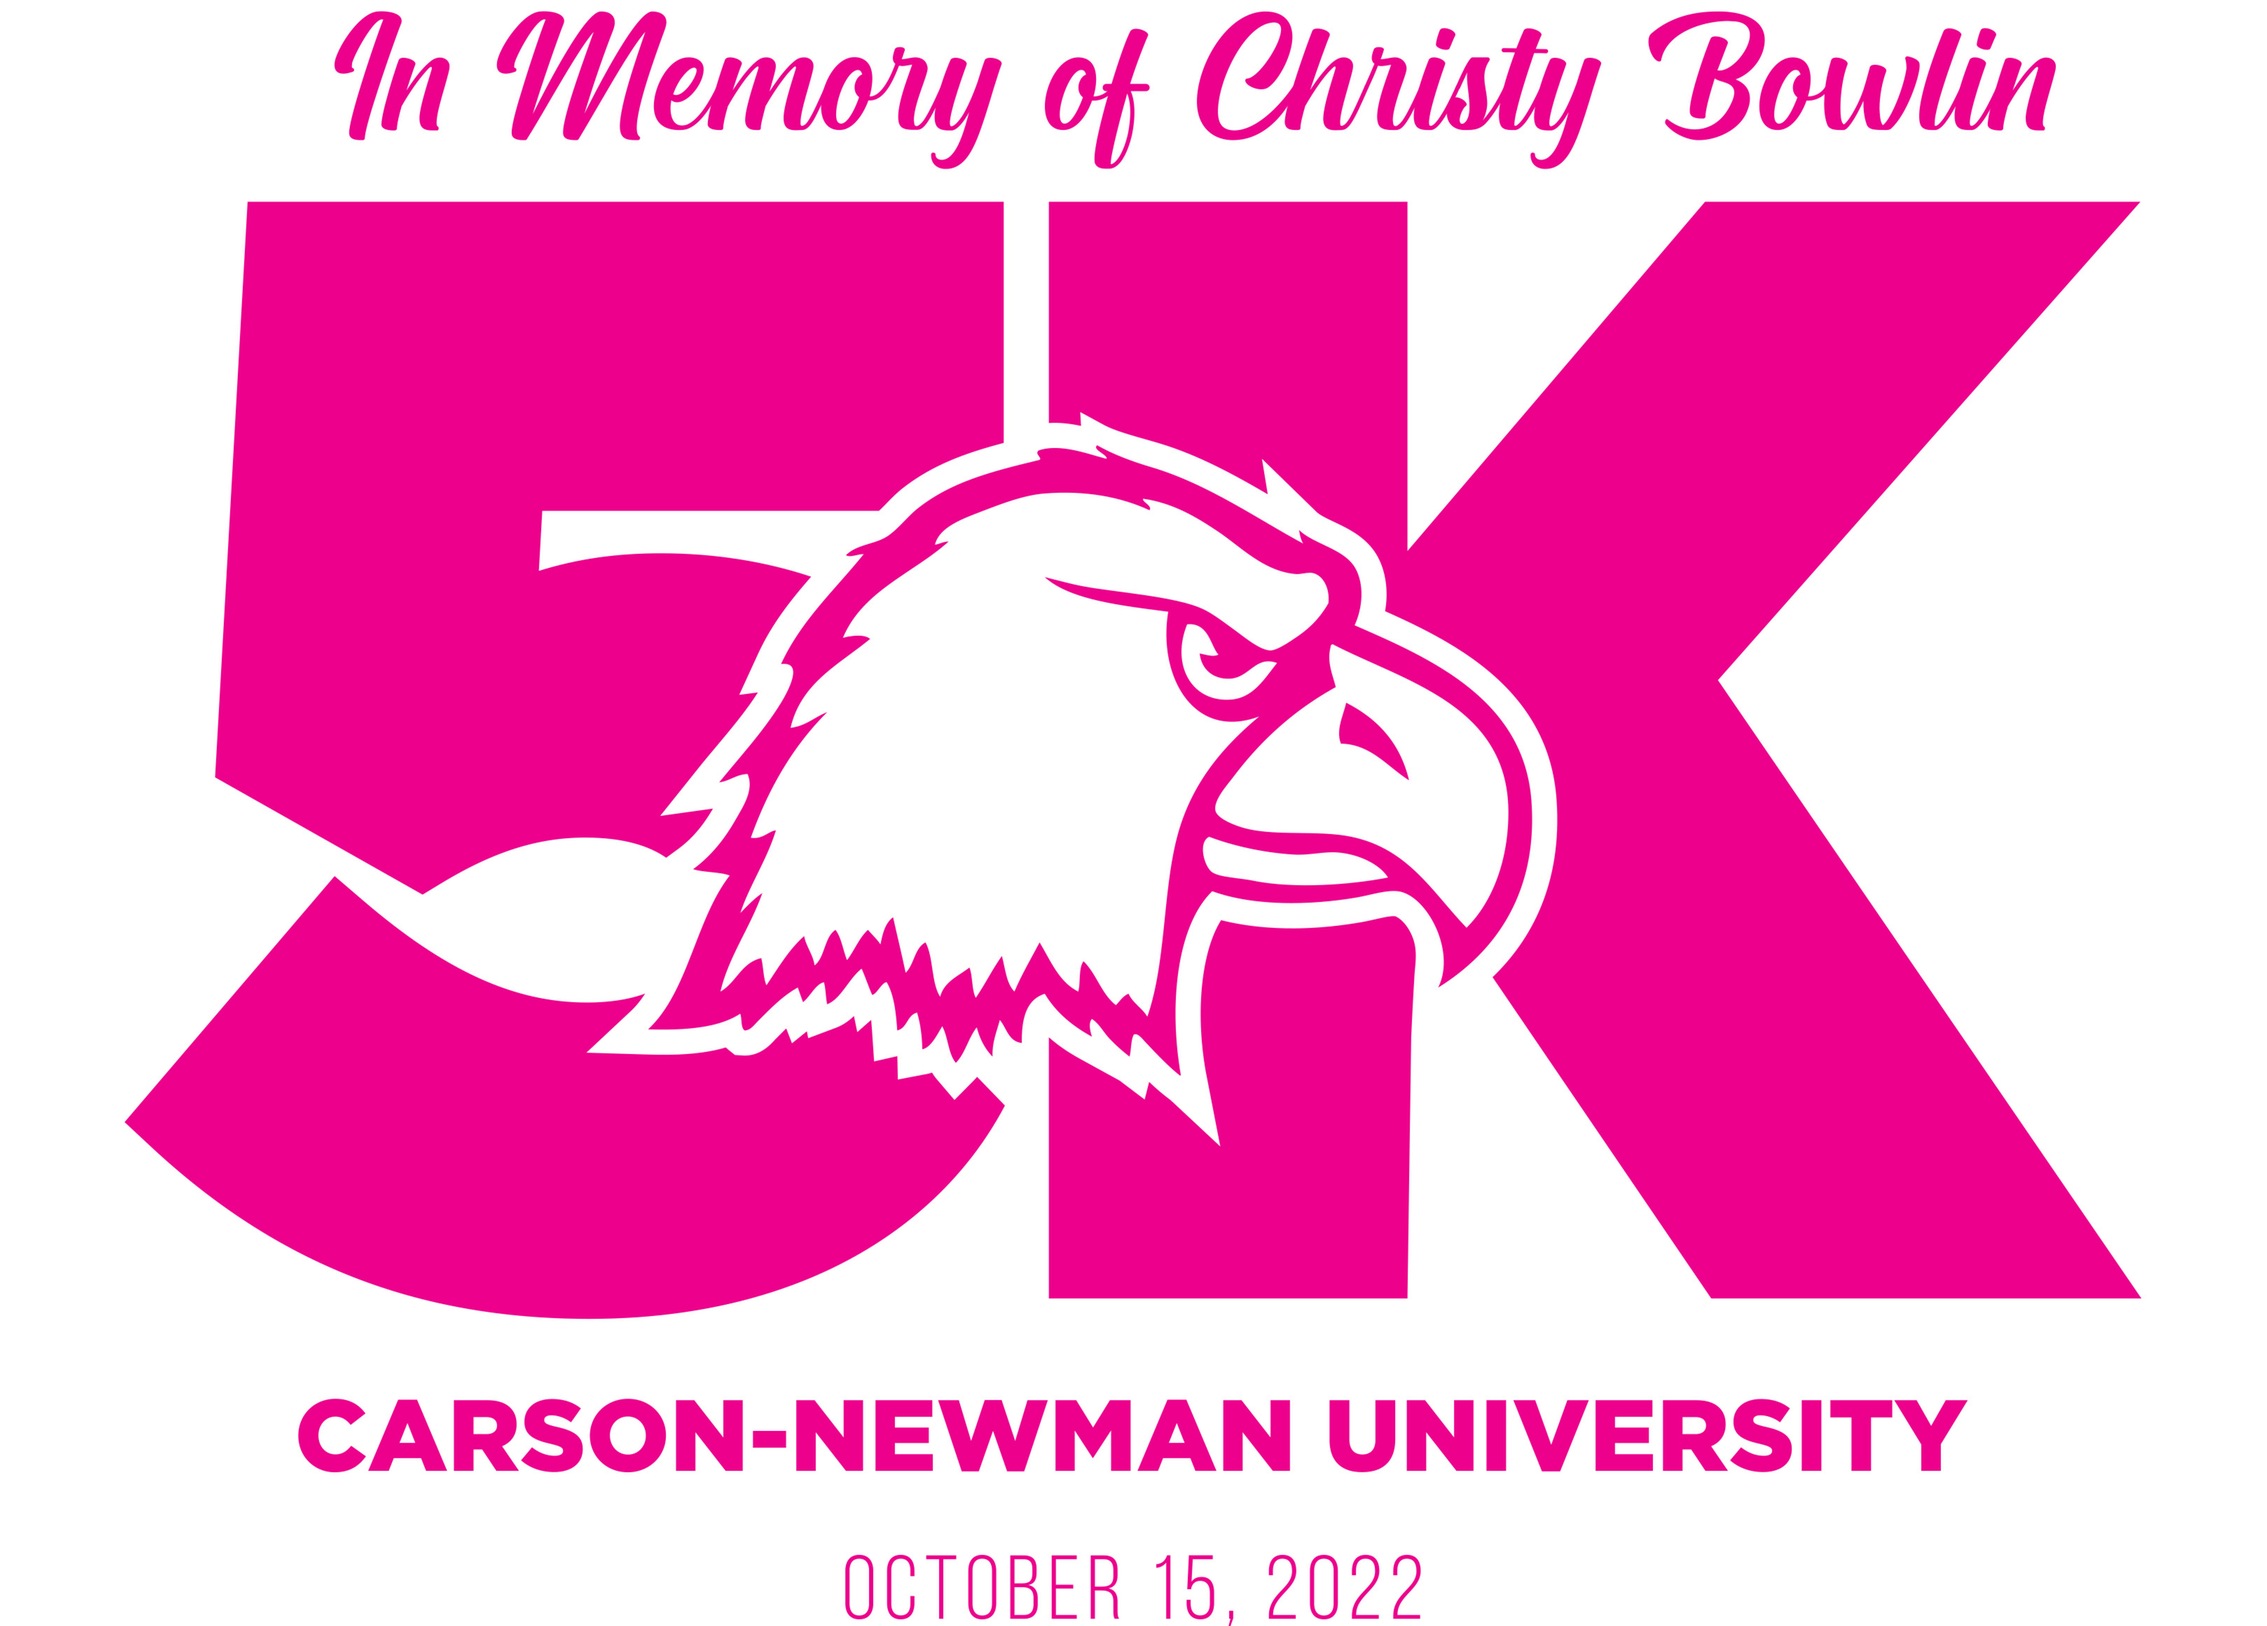 C-N to play host to Race For Breast Cancer Awareness prior to Erskine football game